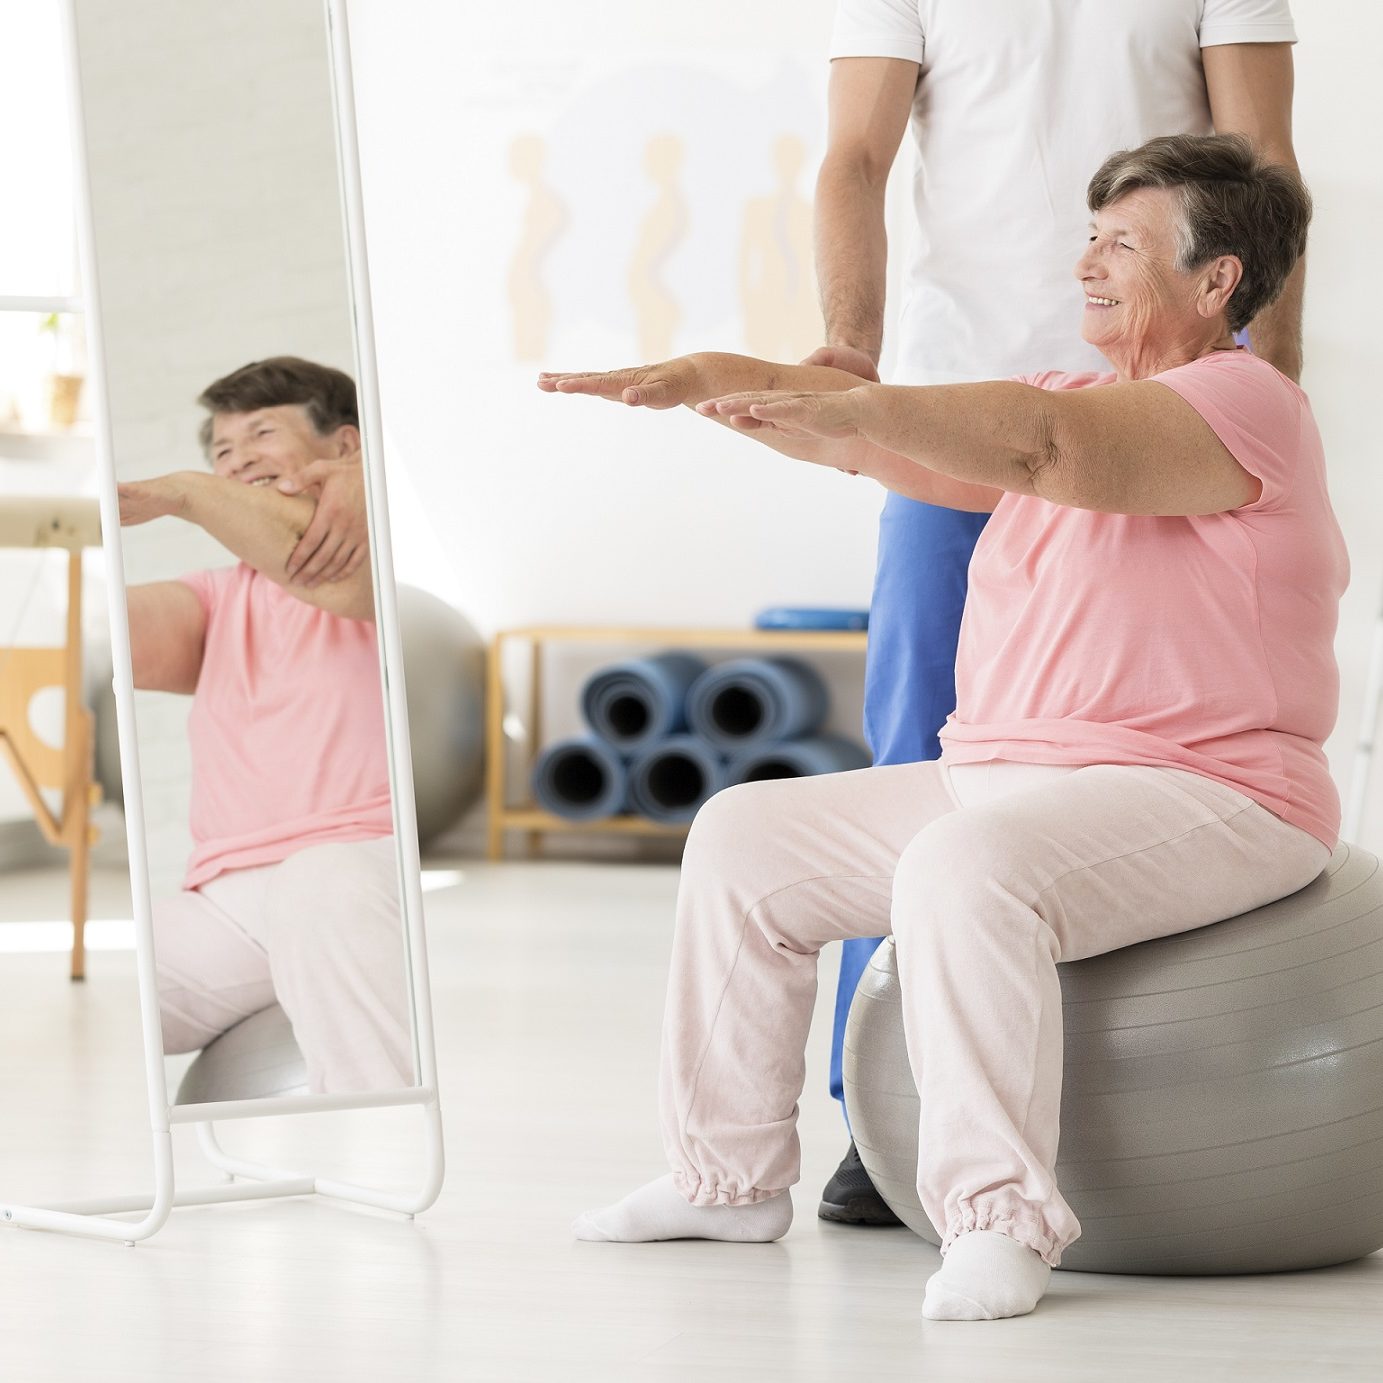 Smiling senior exercising with a physiotherapist on a silver ball at a white gym